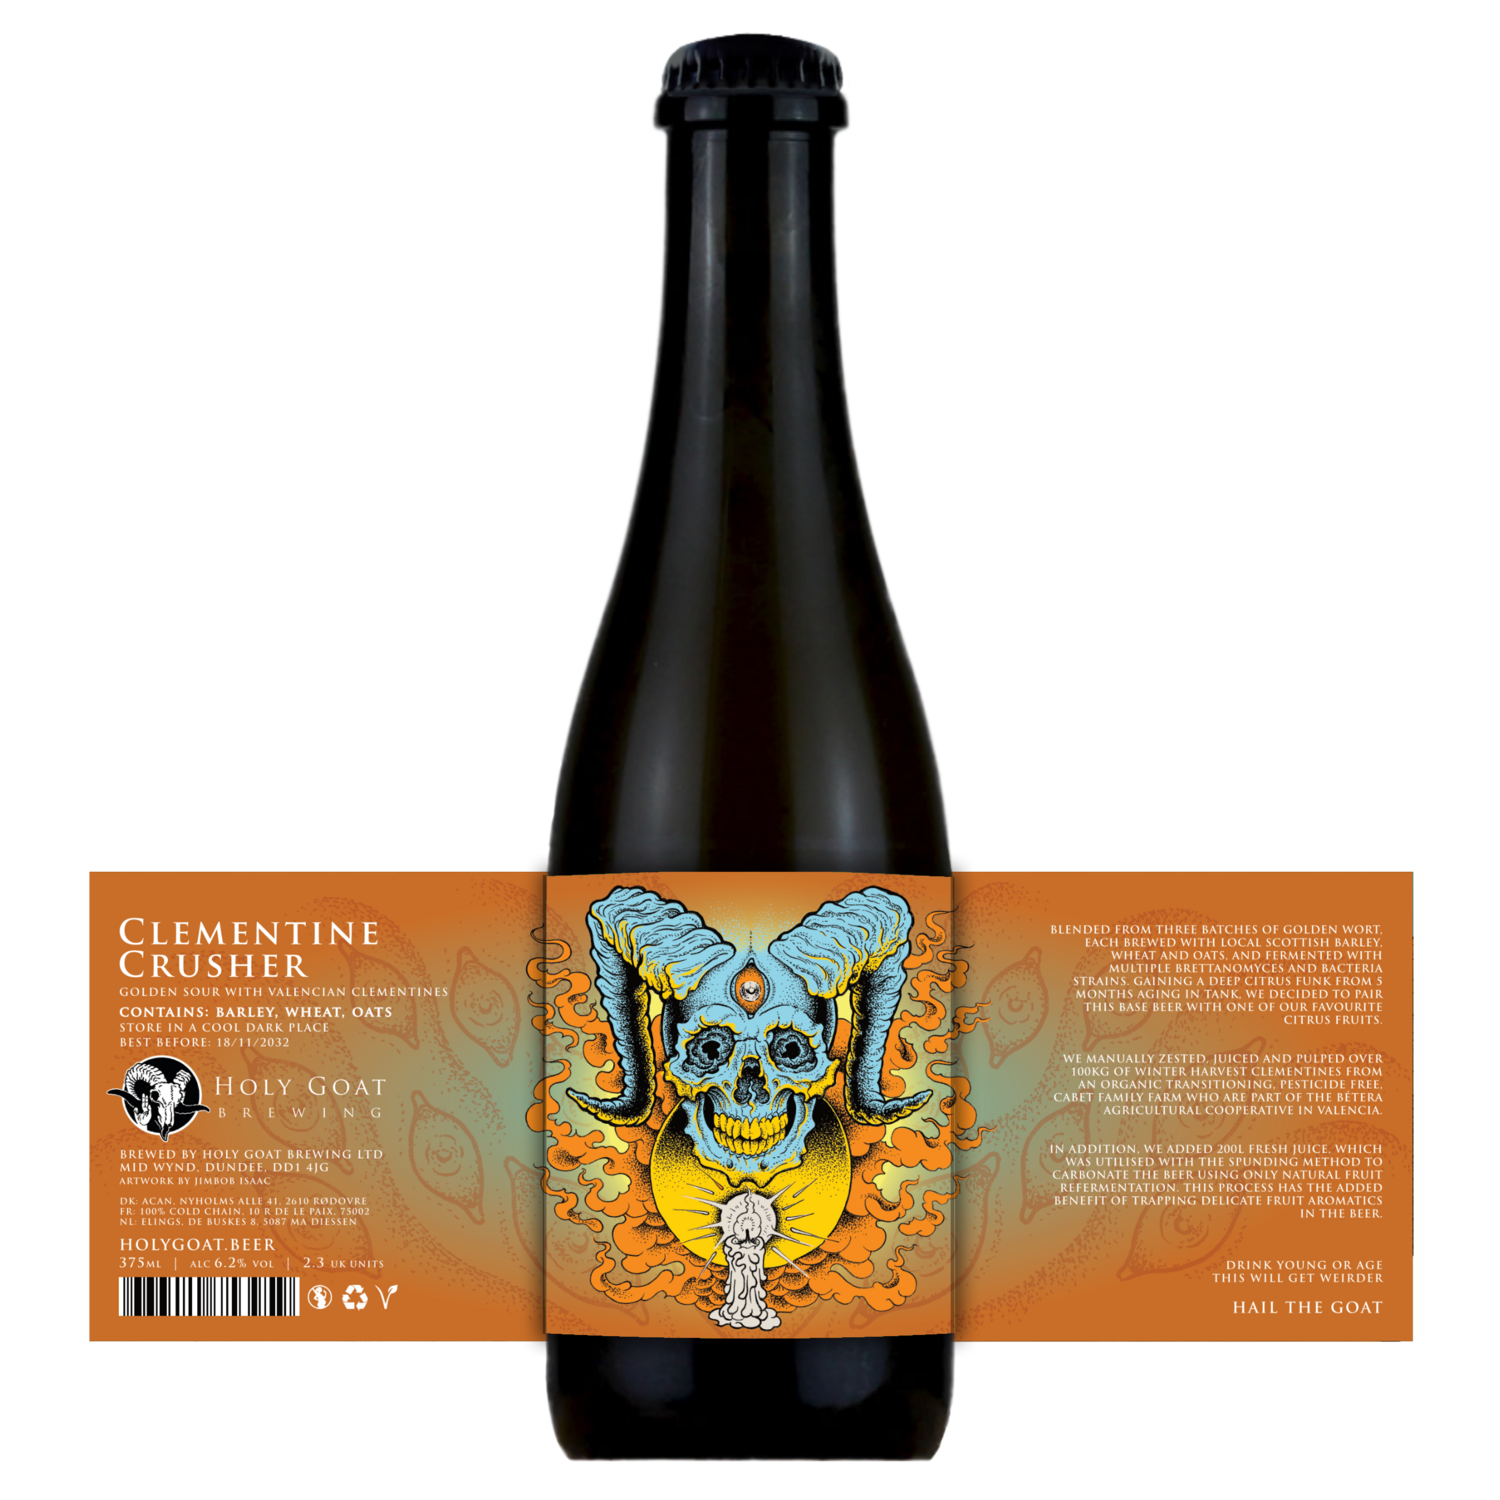 Holy Goat Clementine Crusher Golden Sour